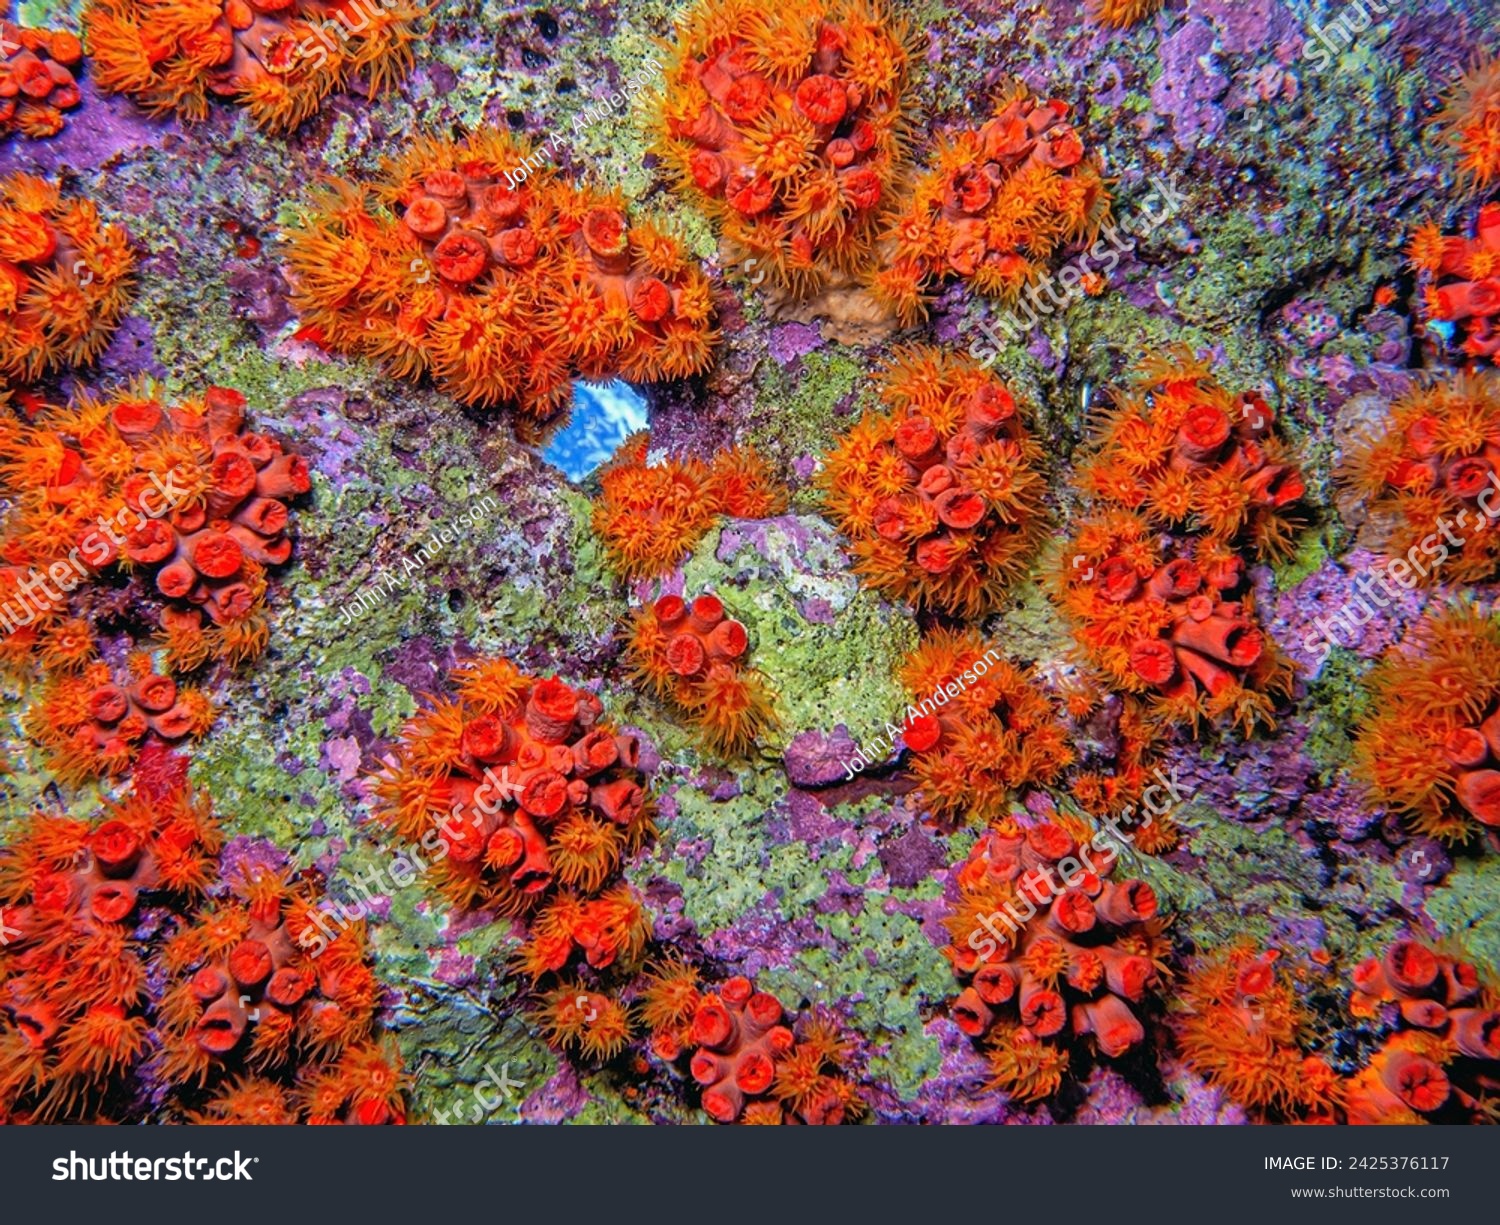 Orange cup coral,Tubastraea coccinea,belongs to a group of corals known as large-polyp stony corals #2425376117